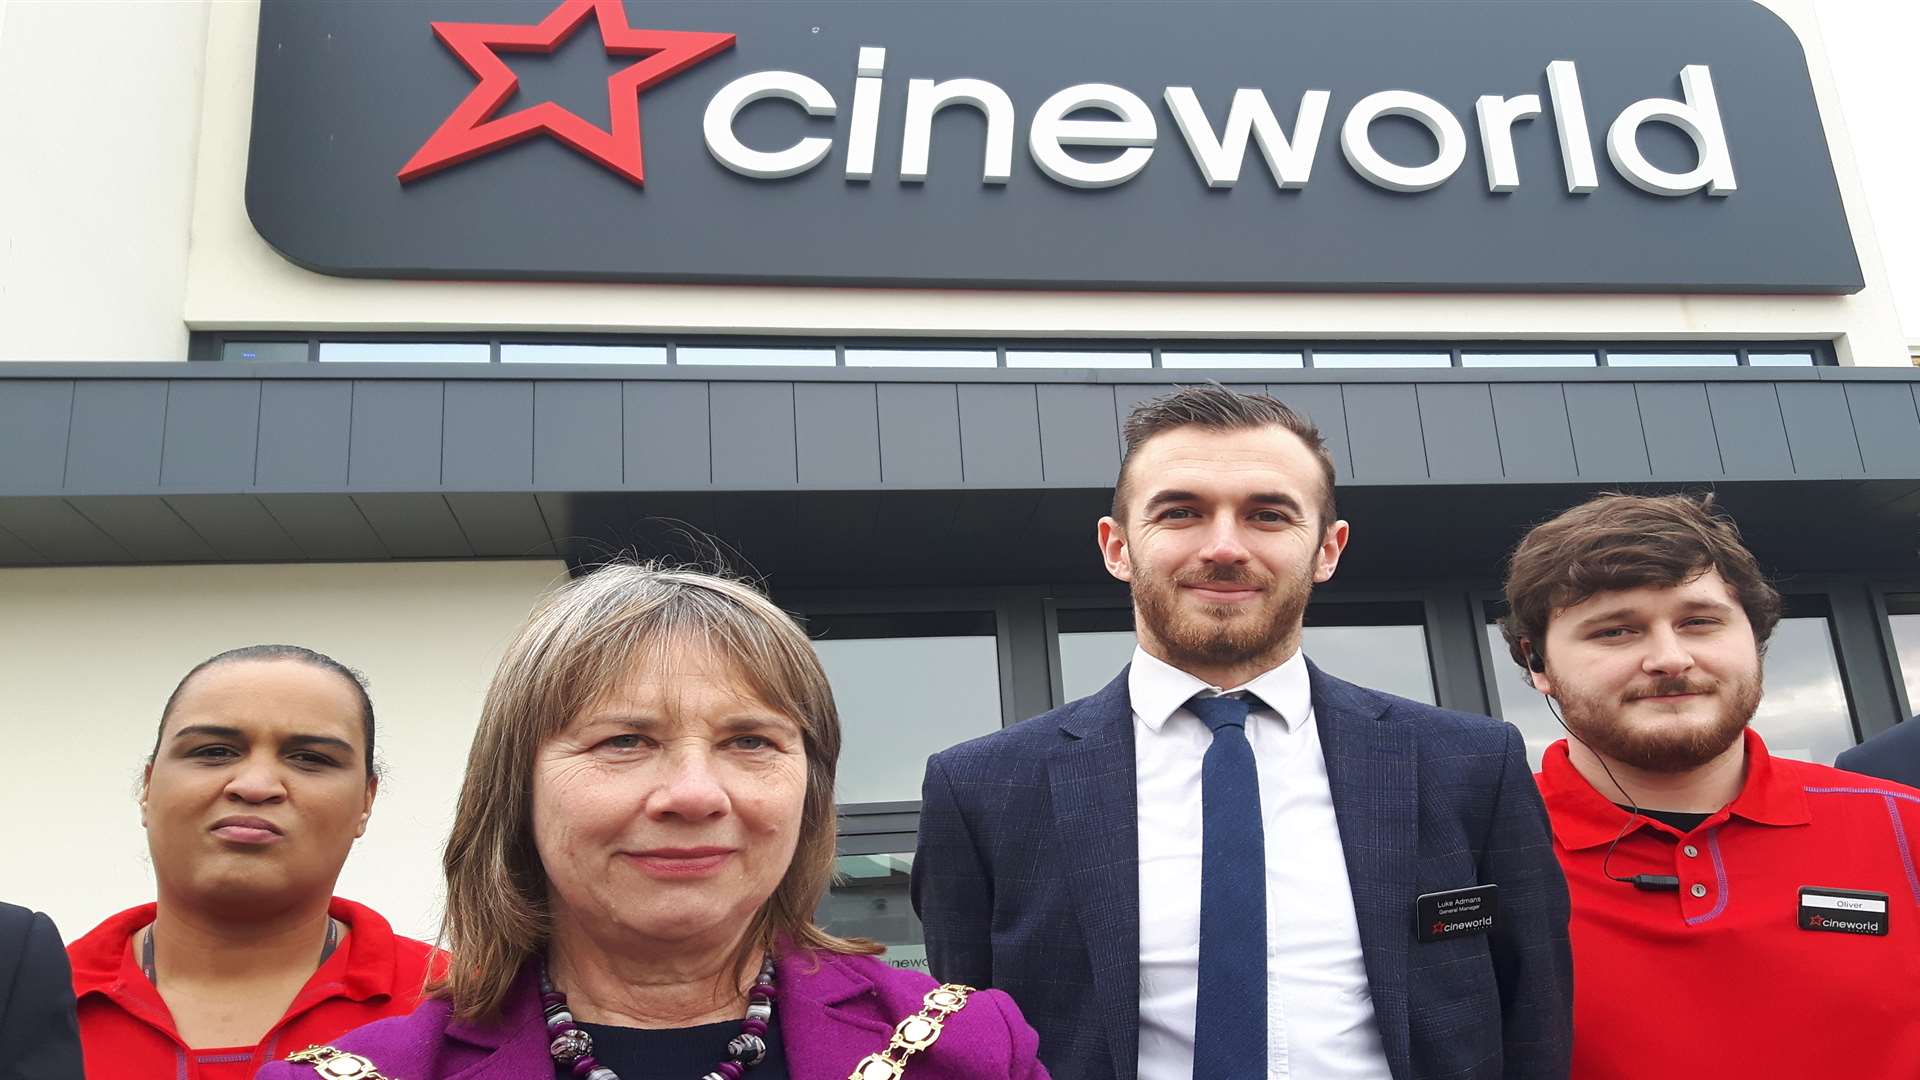 Council representatives and staff at the new cinema